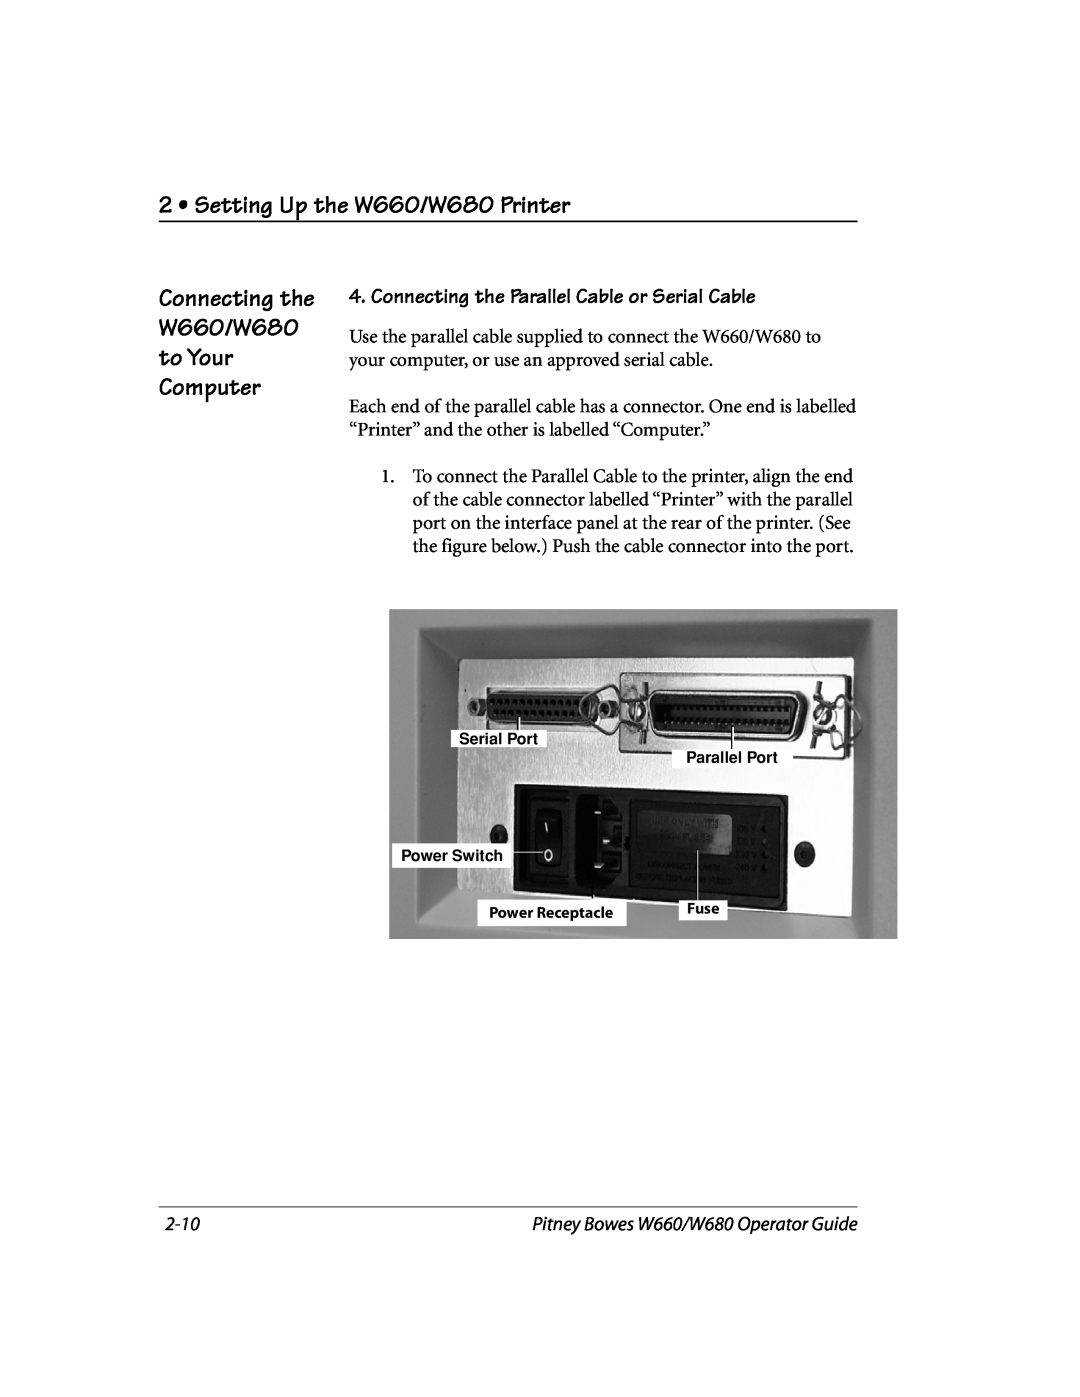 Pitney Bowes manual Connecting the W660/W680 to Your Computer, Connecting the Parallel Cable or Serial Cable 